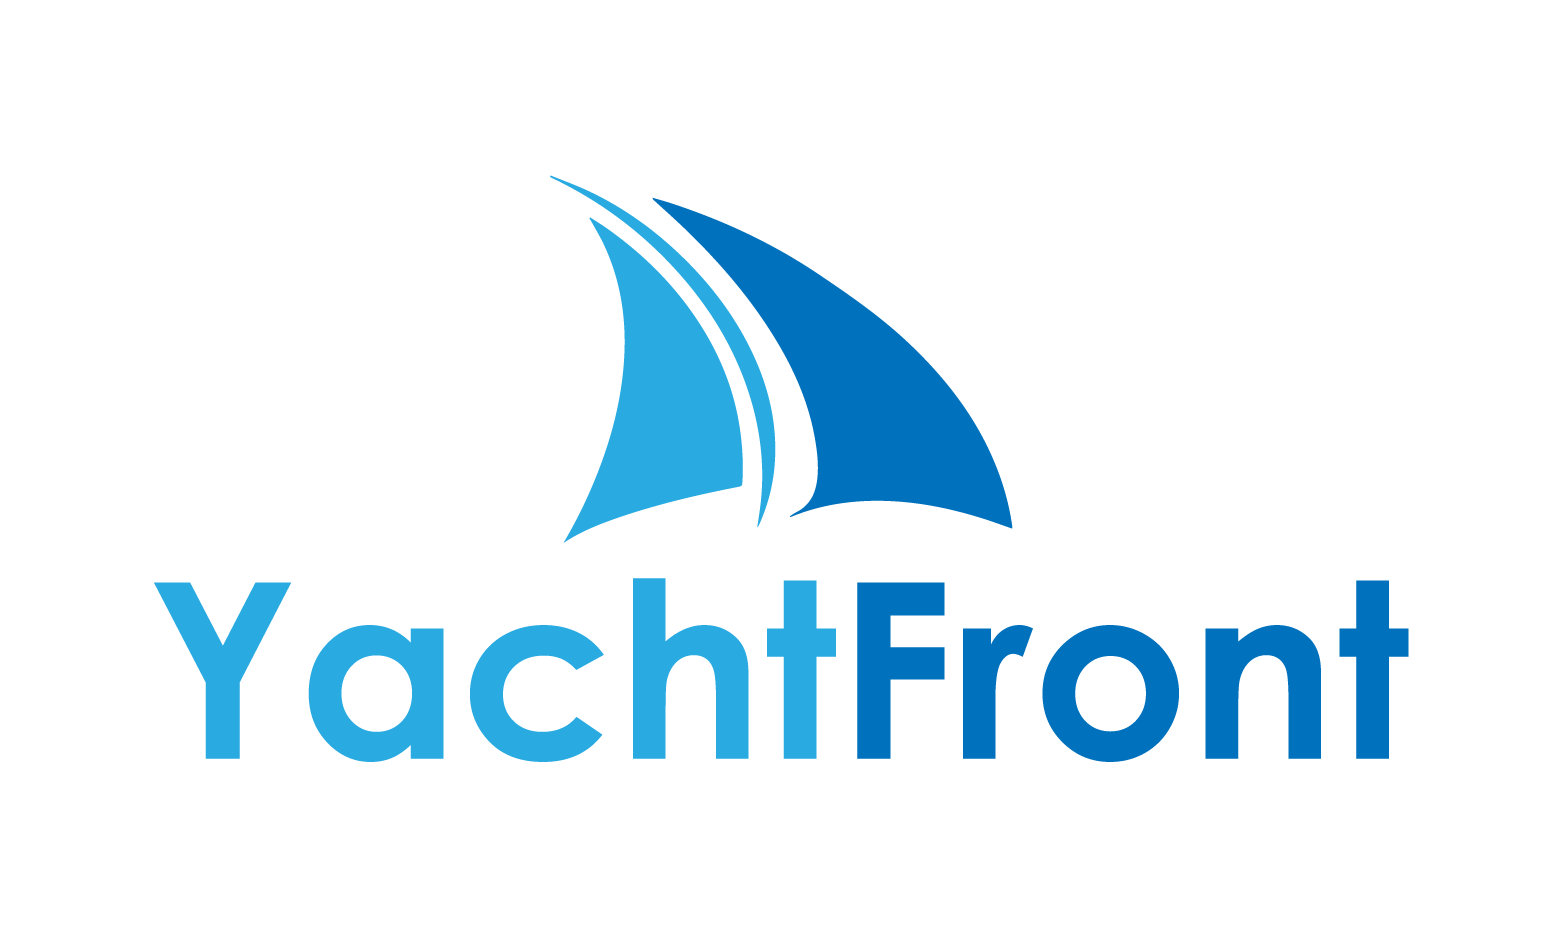 YachtFront.com - Creative brandable domain for sale